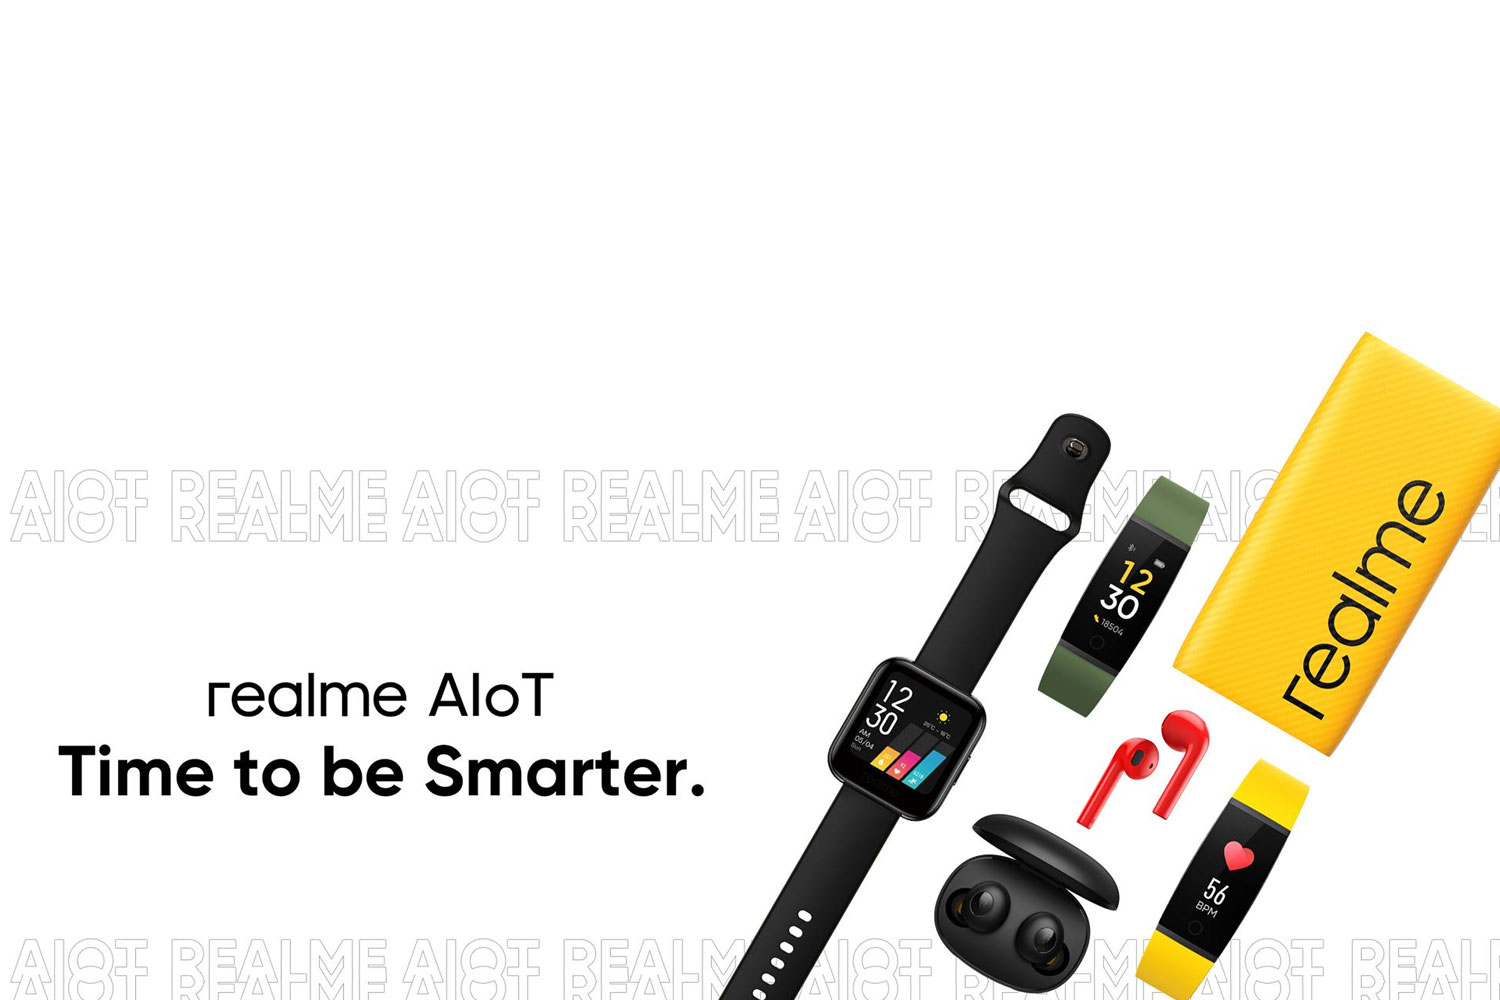 realme AIoT Devices Launch